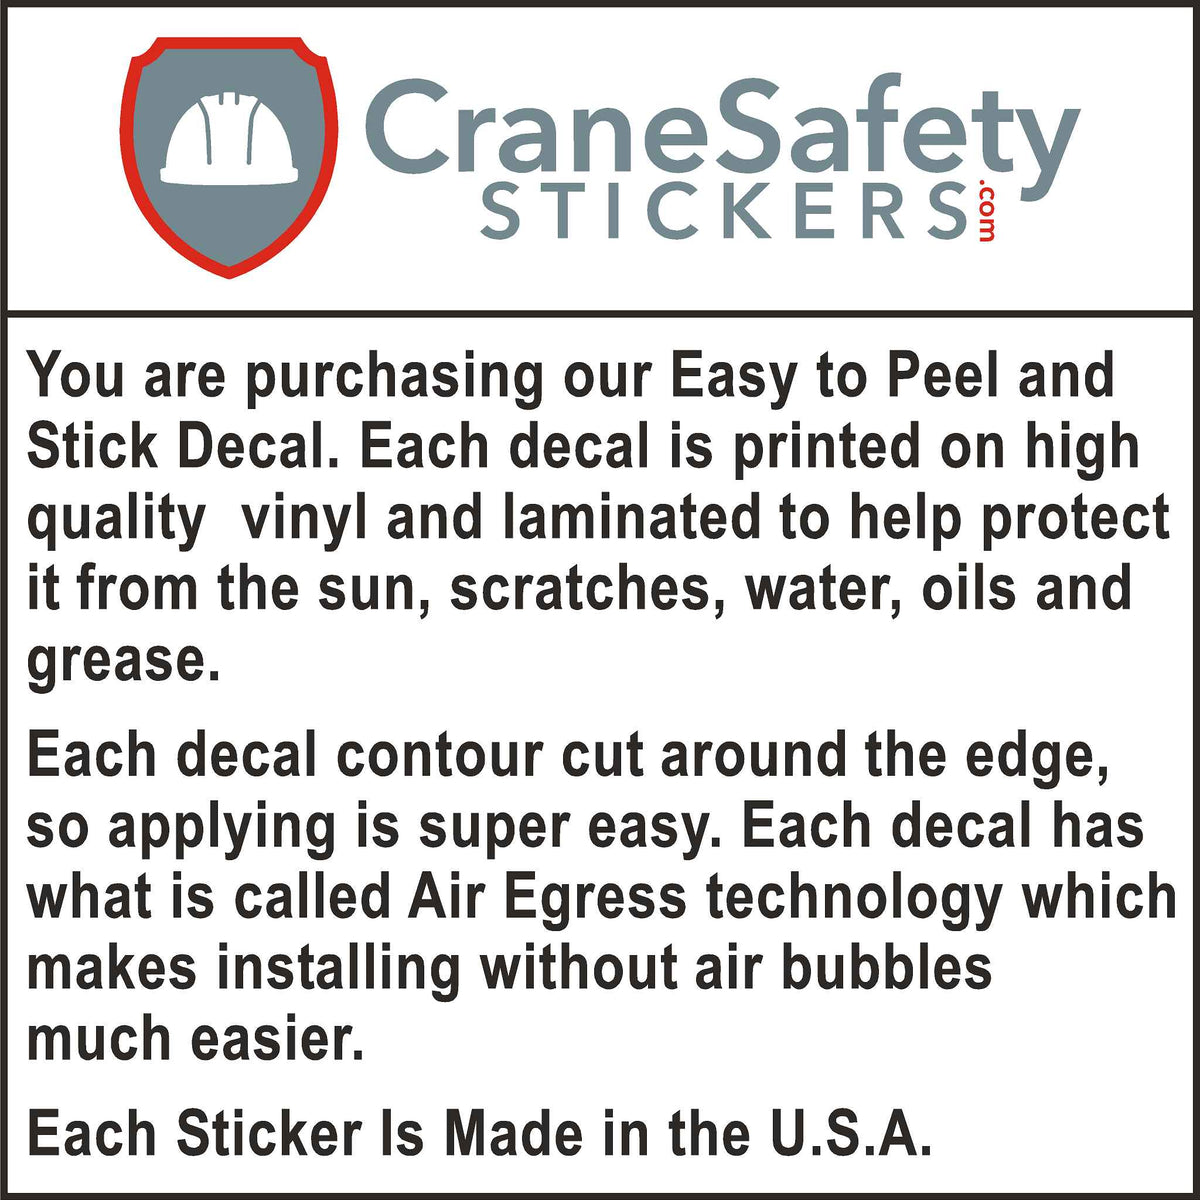 The quality of our Spanish printed crane safety sticker.